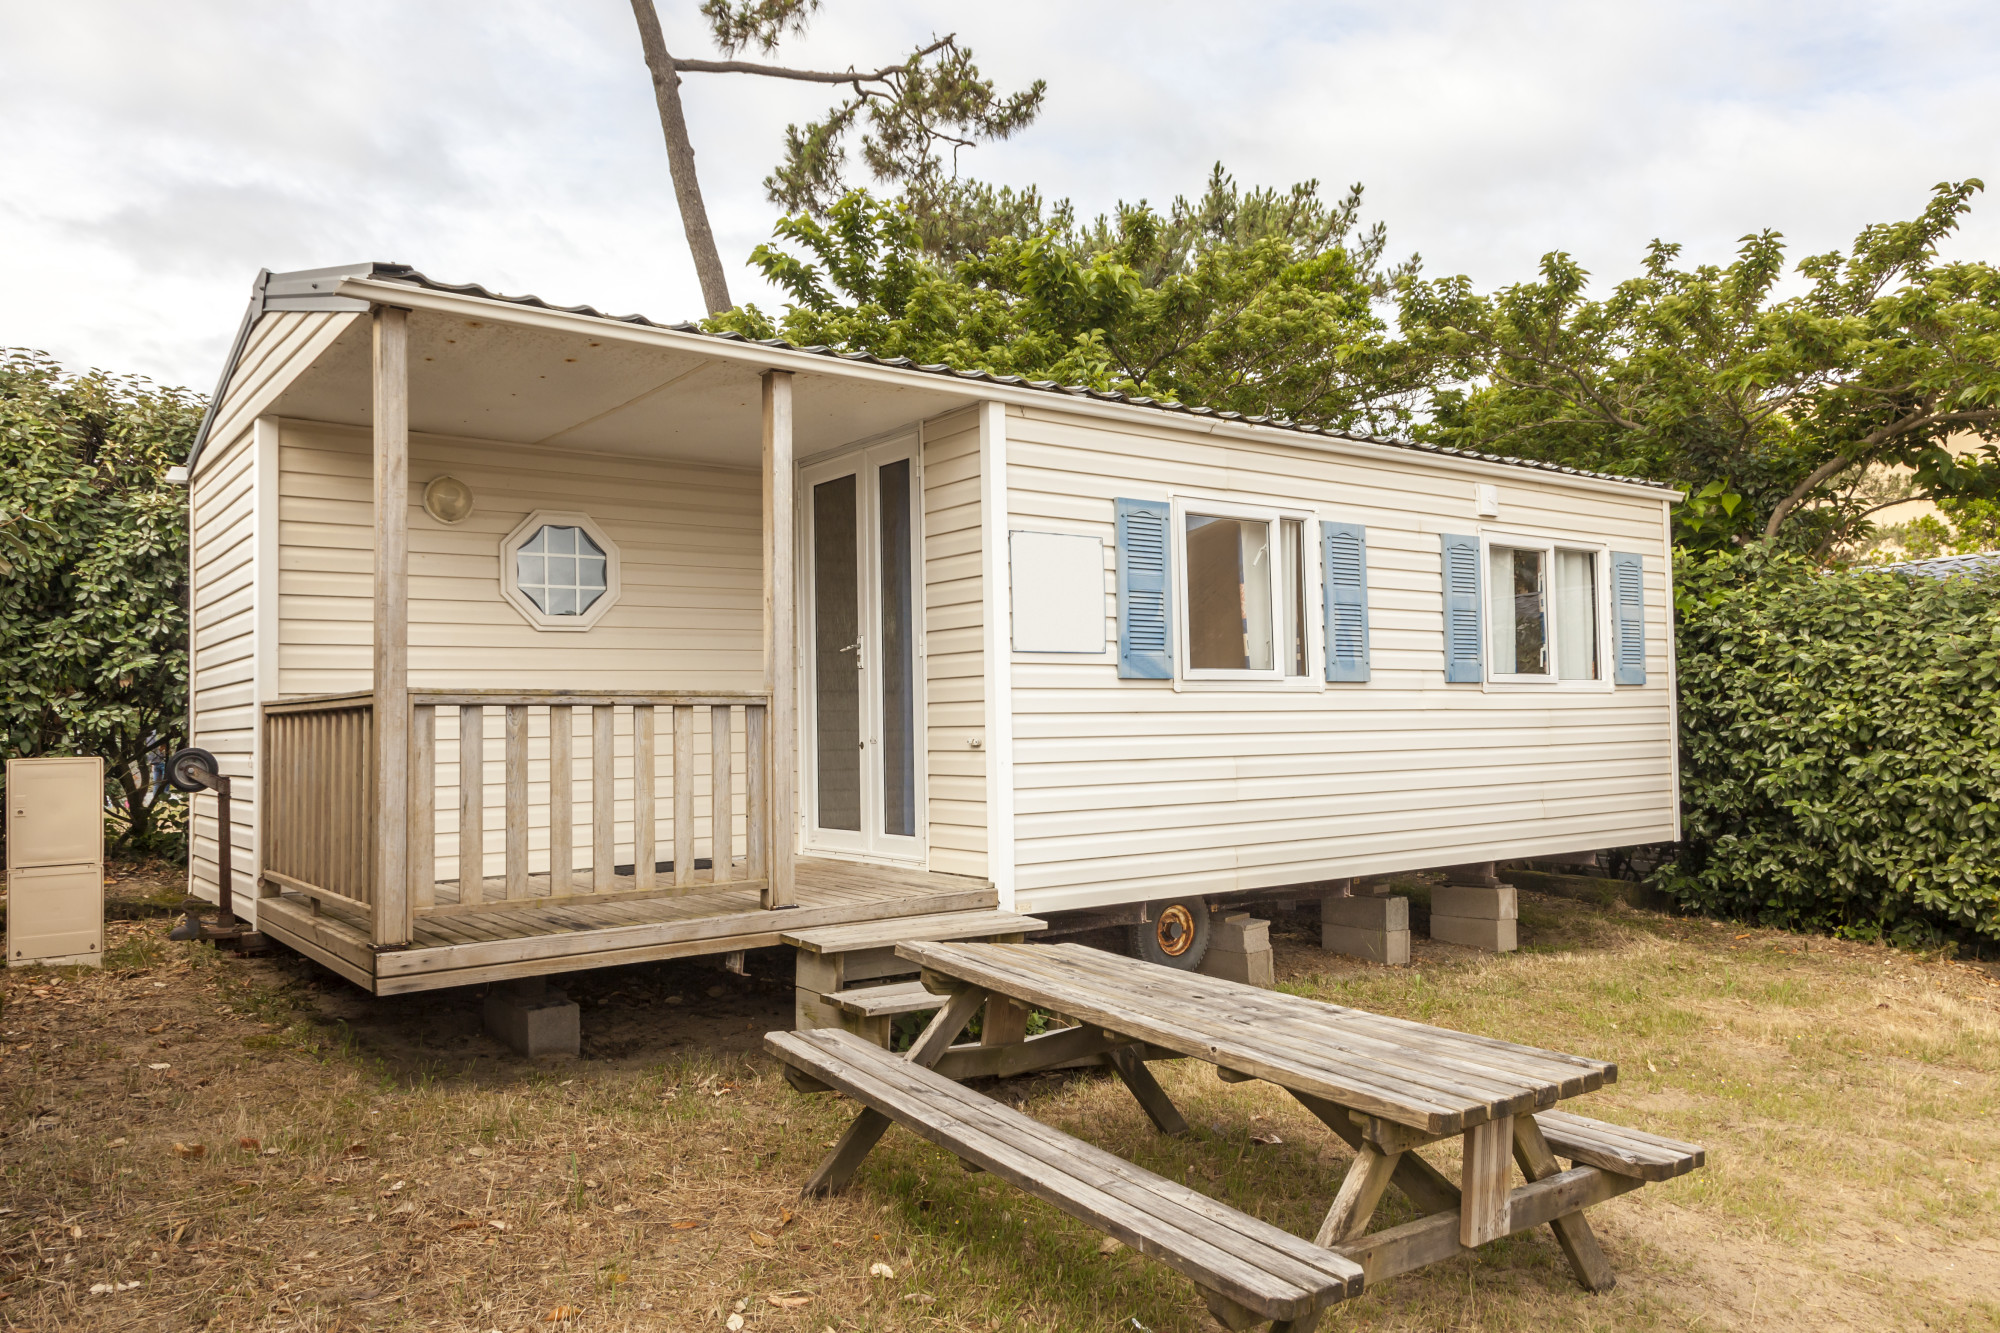 Buy a New Mobile Home on a Budget